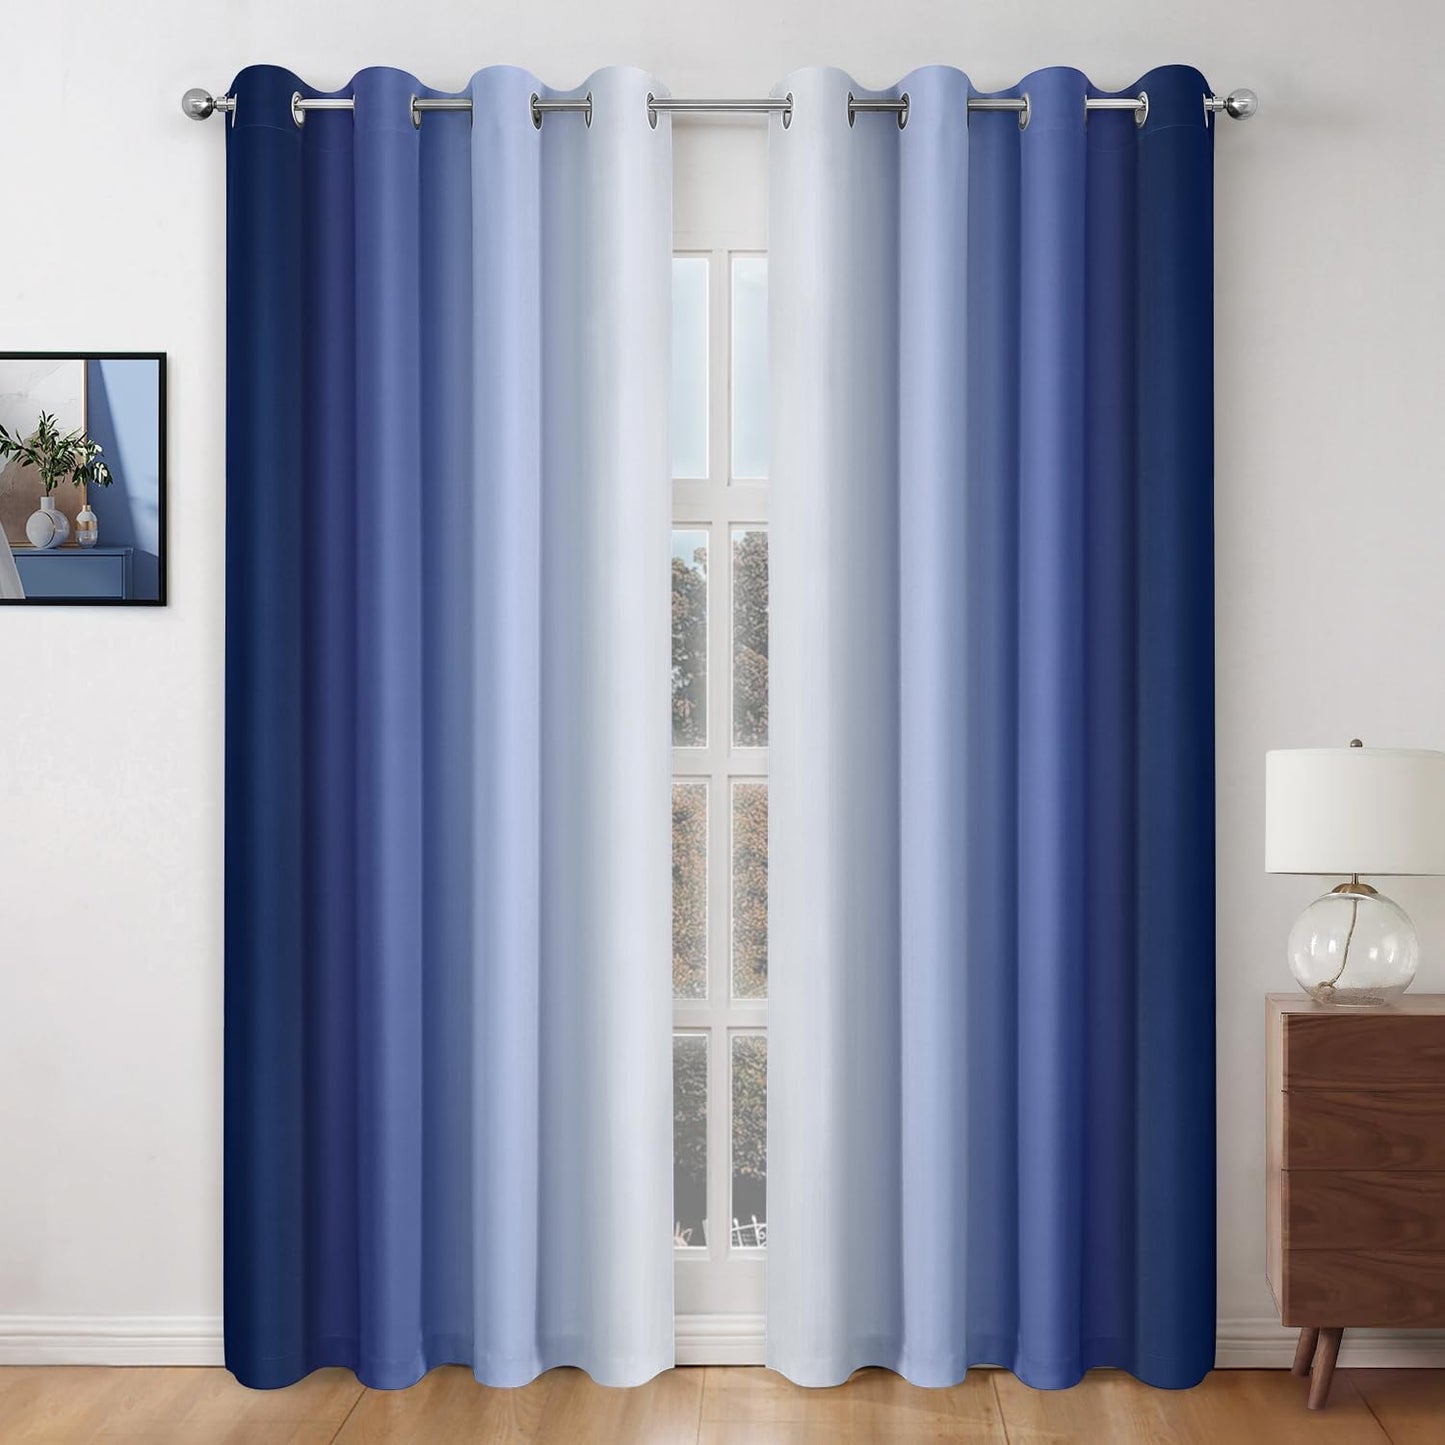 HOMEIDEAS Navy Blue Ombre Blackout Curtains 52 X 84 Inch Length Gradient Room Darkening Thermal Insulated Energy Saving Grommet 2 Panels Window Drapes for Living Room/Bedroom  HOMEIDEAS Navy Blue 1 52"W X 96"L 